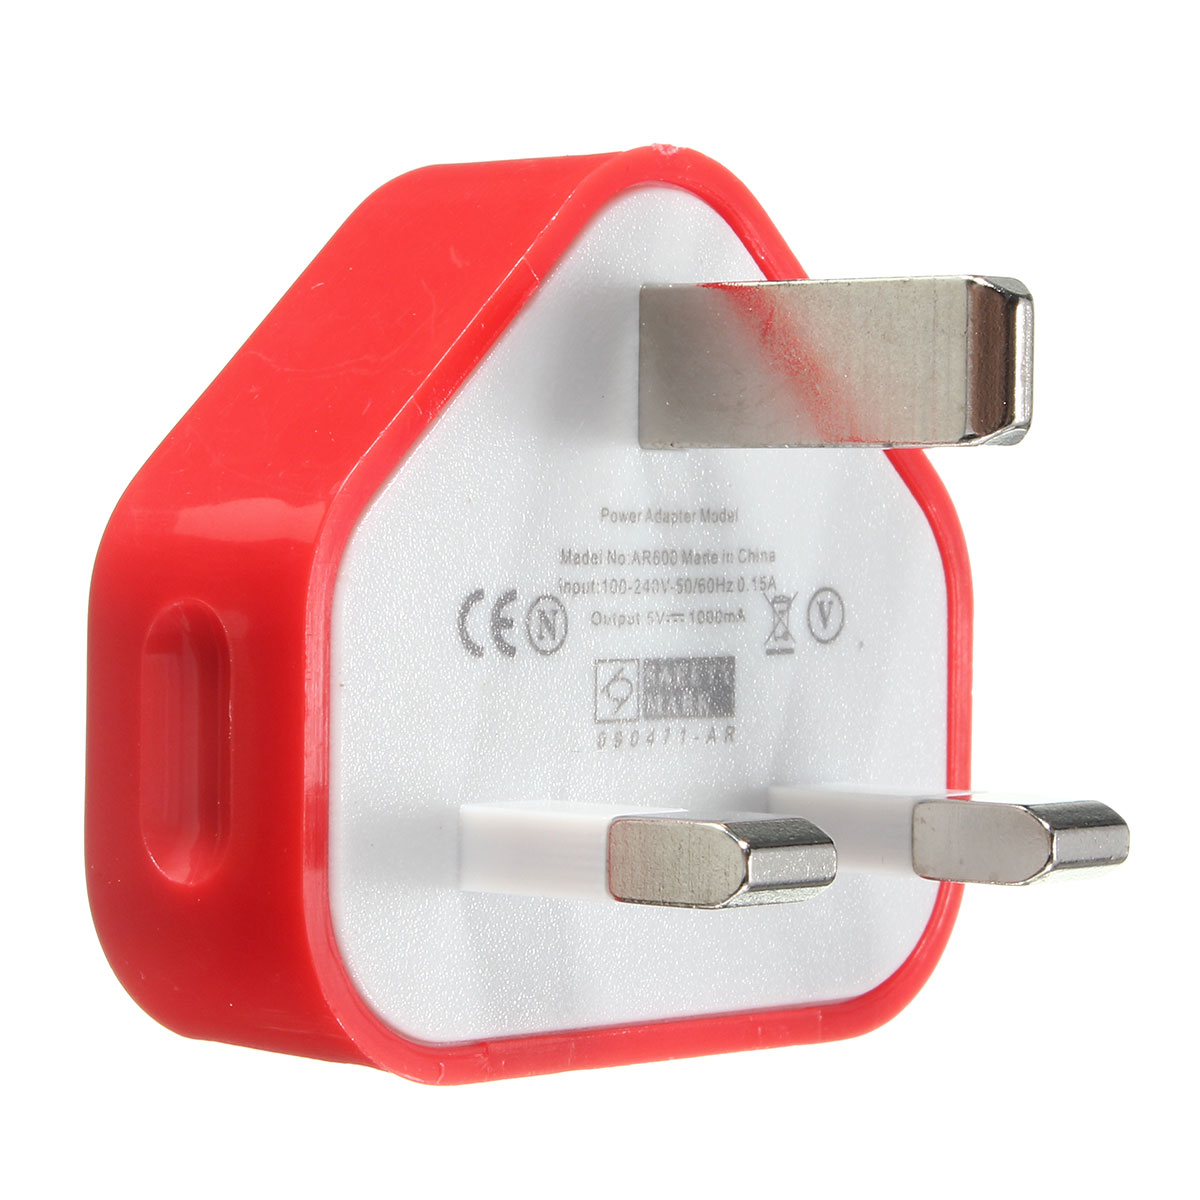 UK-USB-Plug-Charger-Mains-Wall-Home-Adapter-For-Samsung-Android-Phone-Tablets-1191576-8